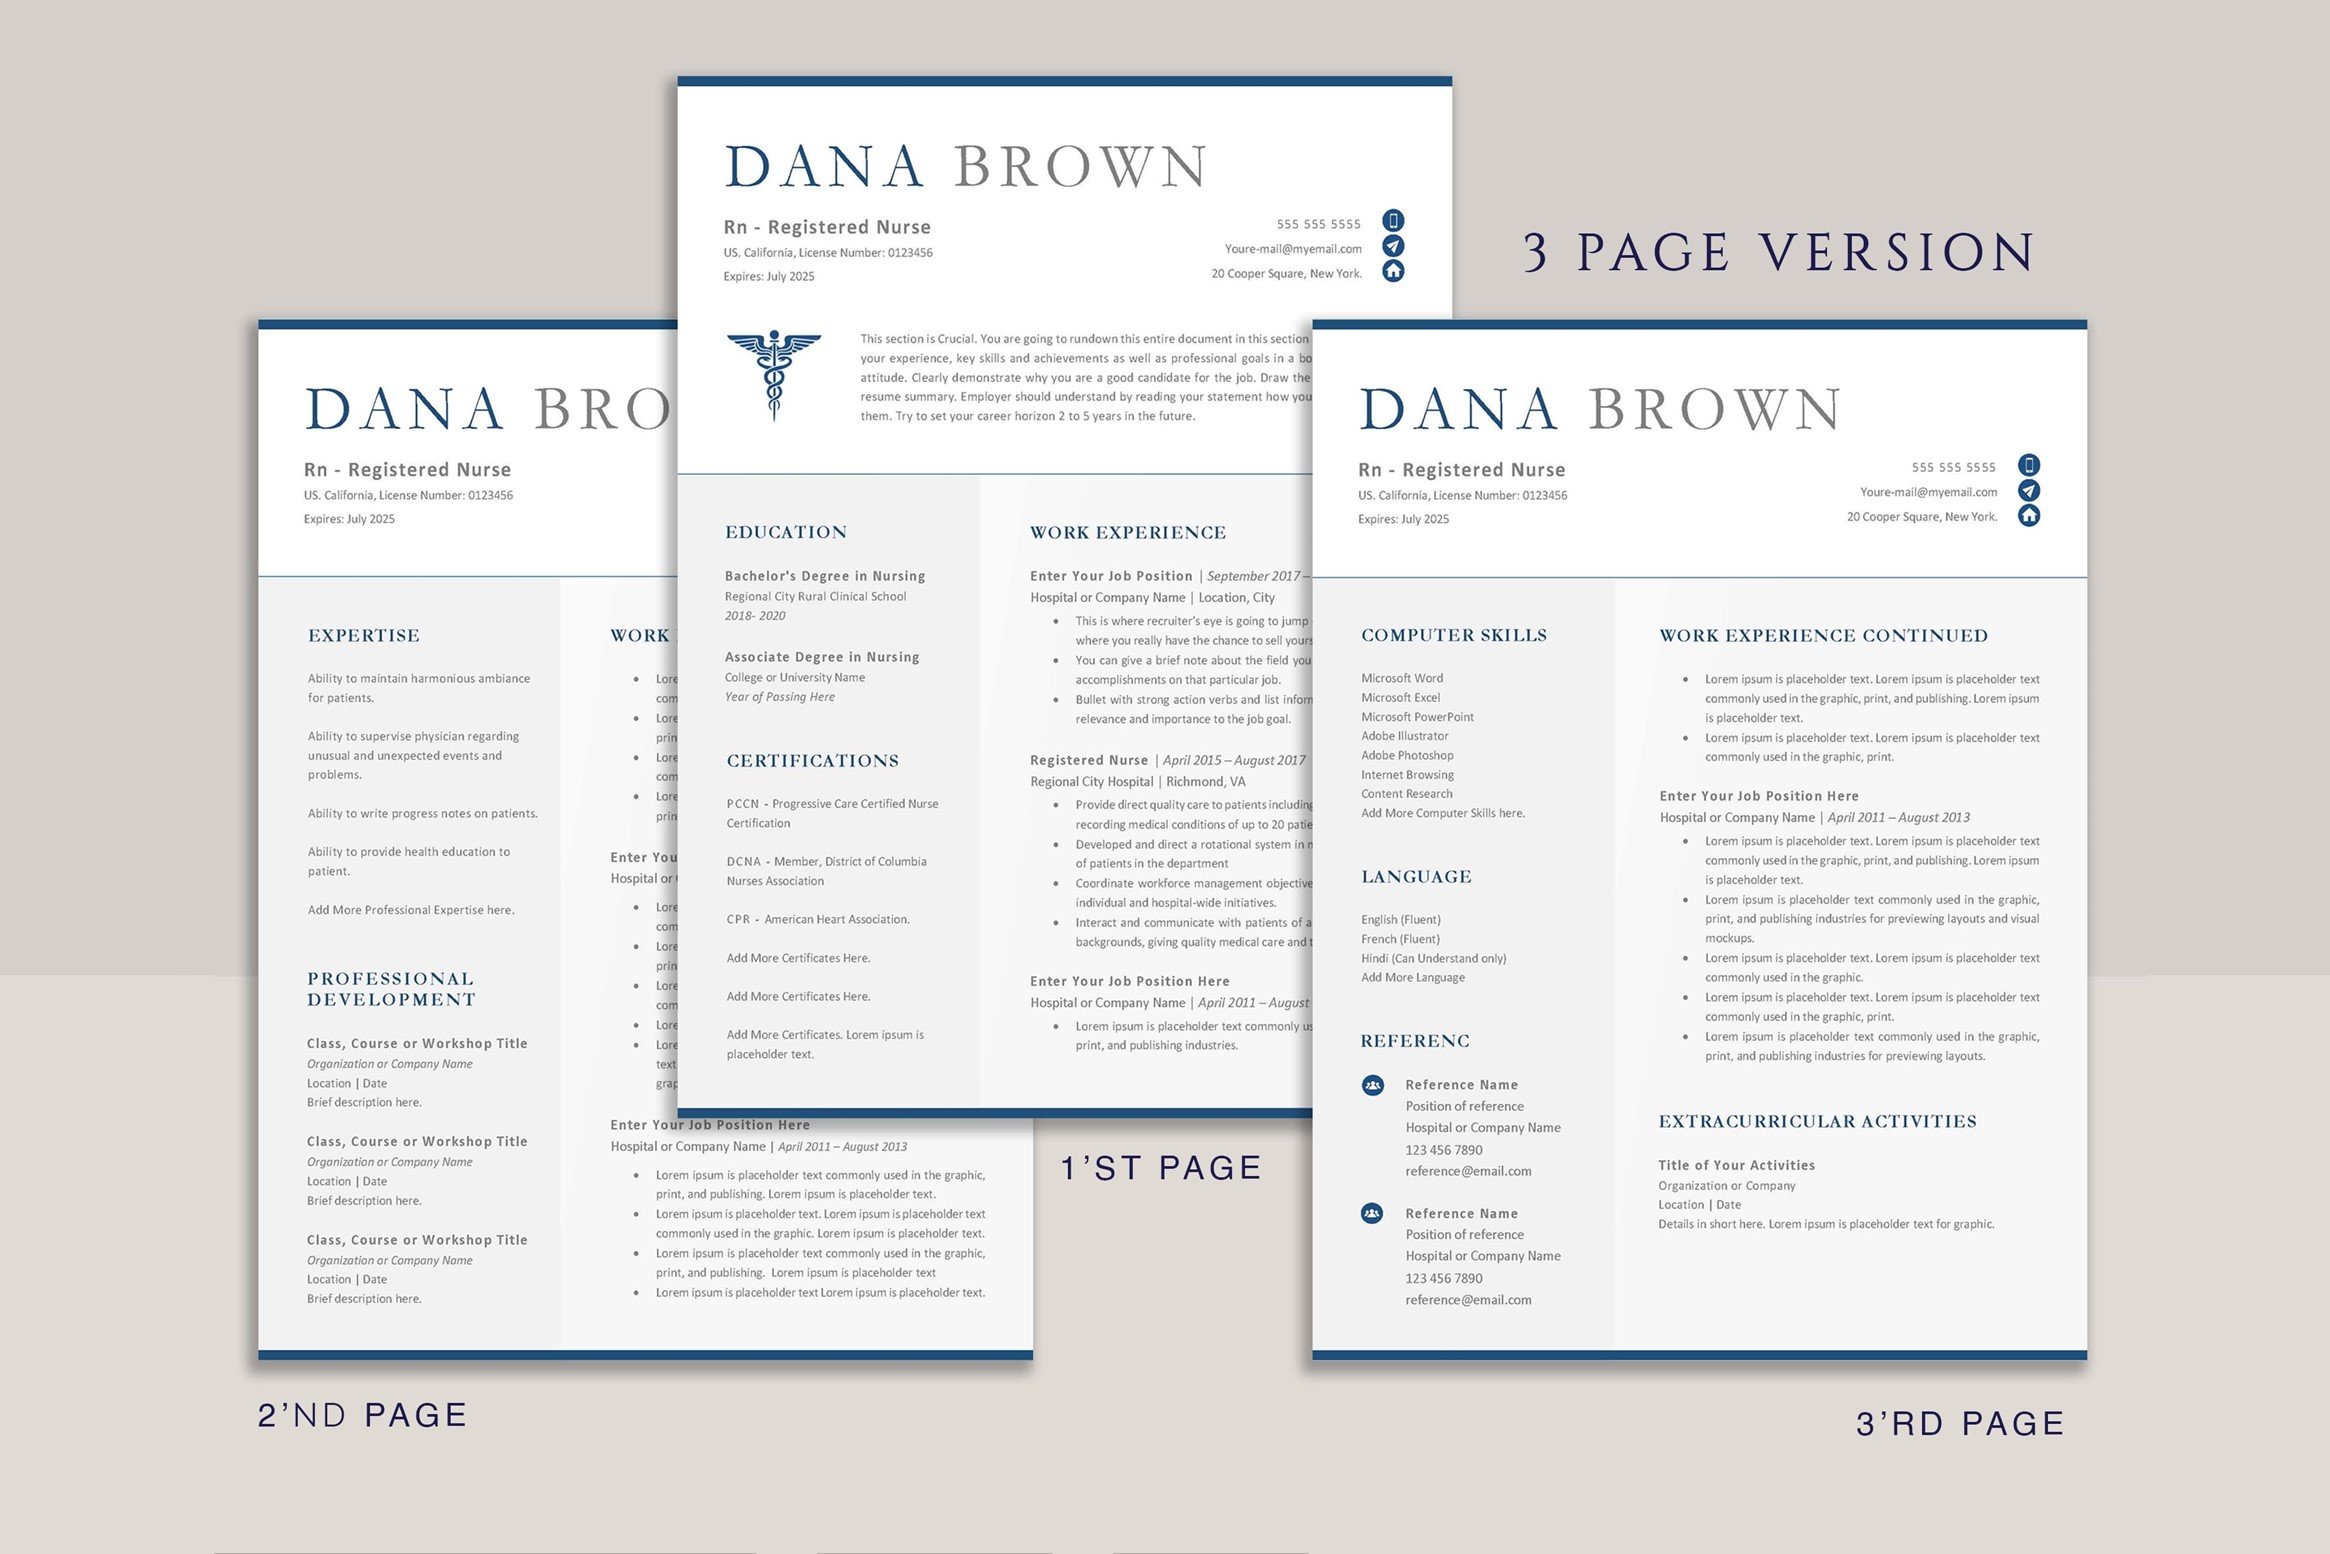 Three resume templates for doctors and nurses.